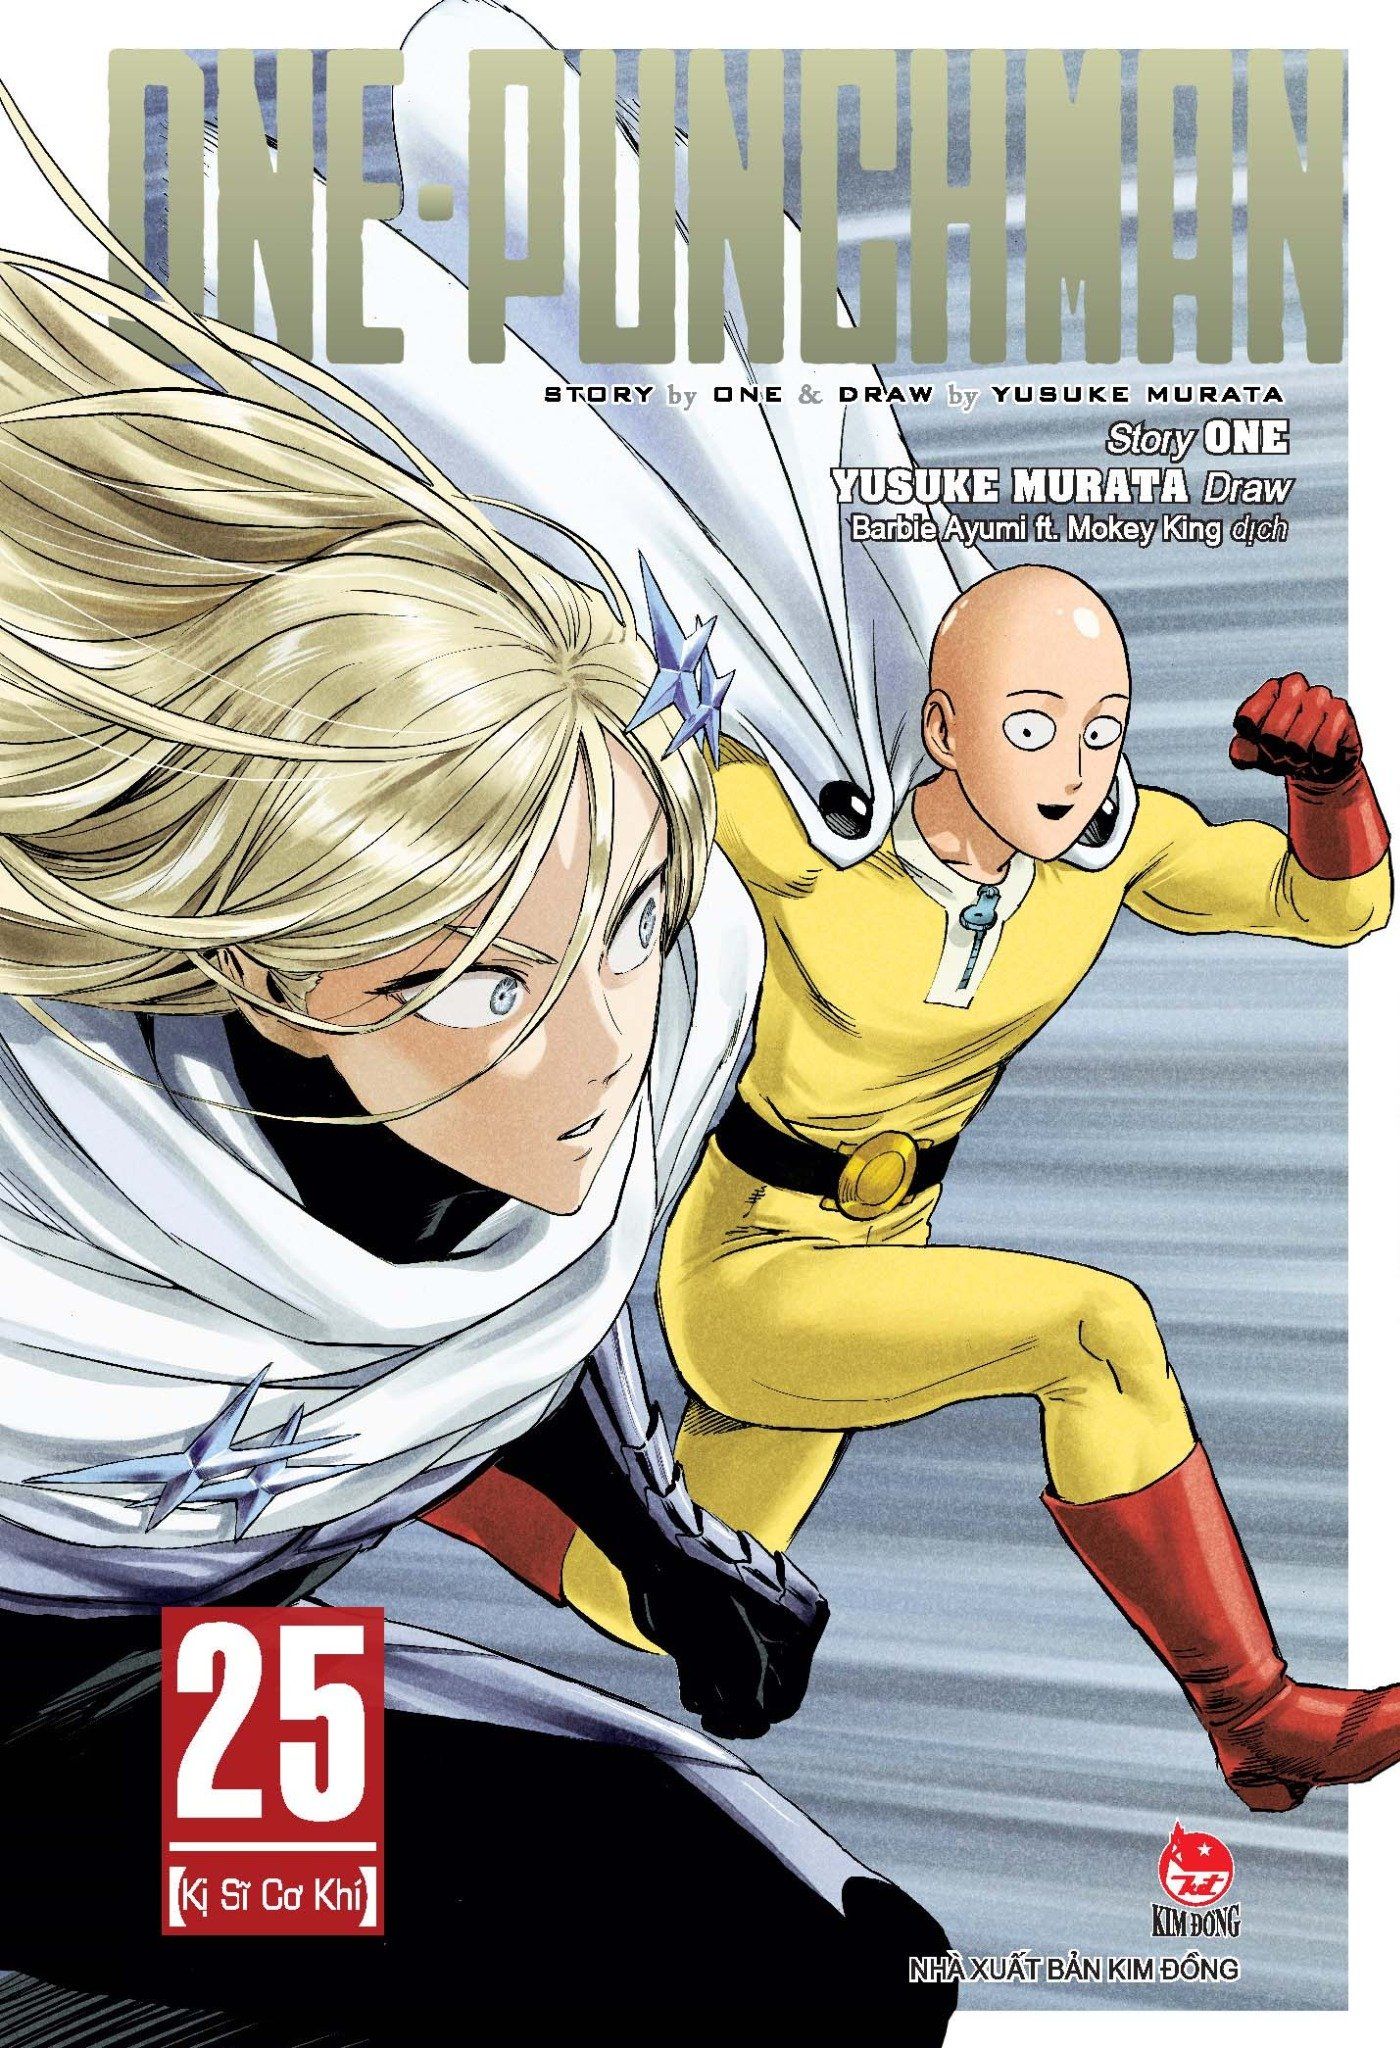  One-Punch Man Tập 25 